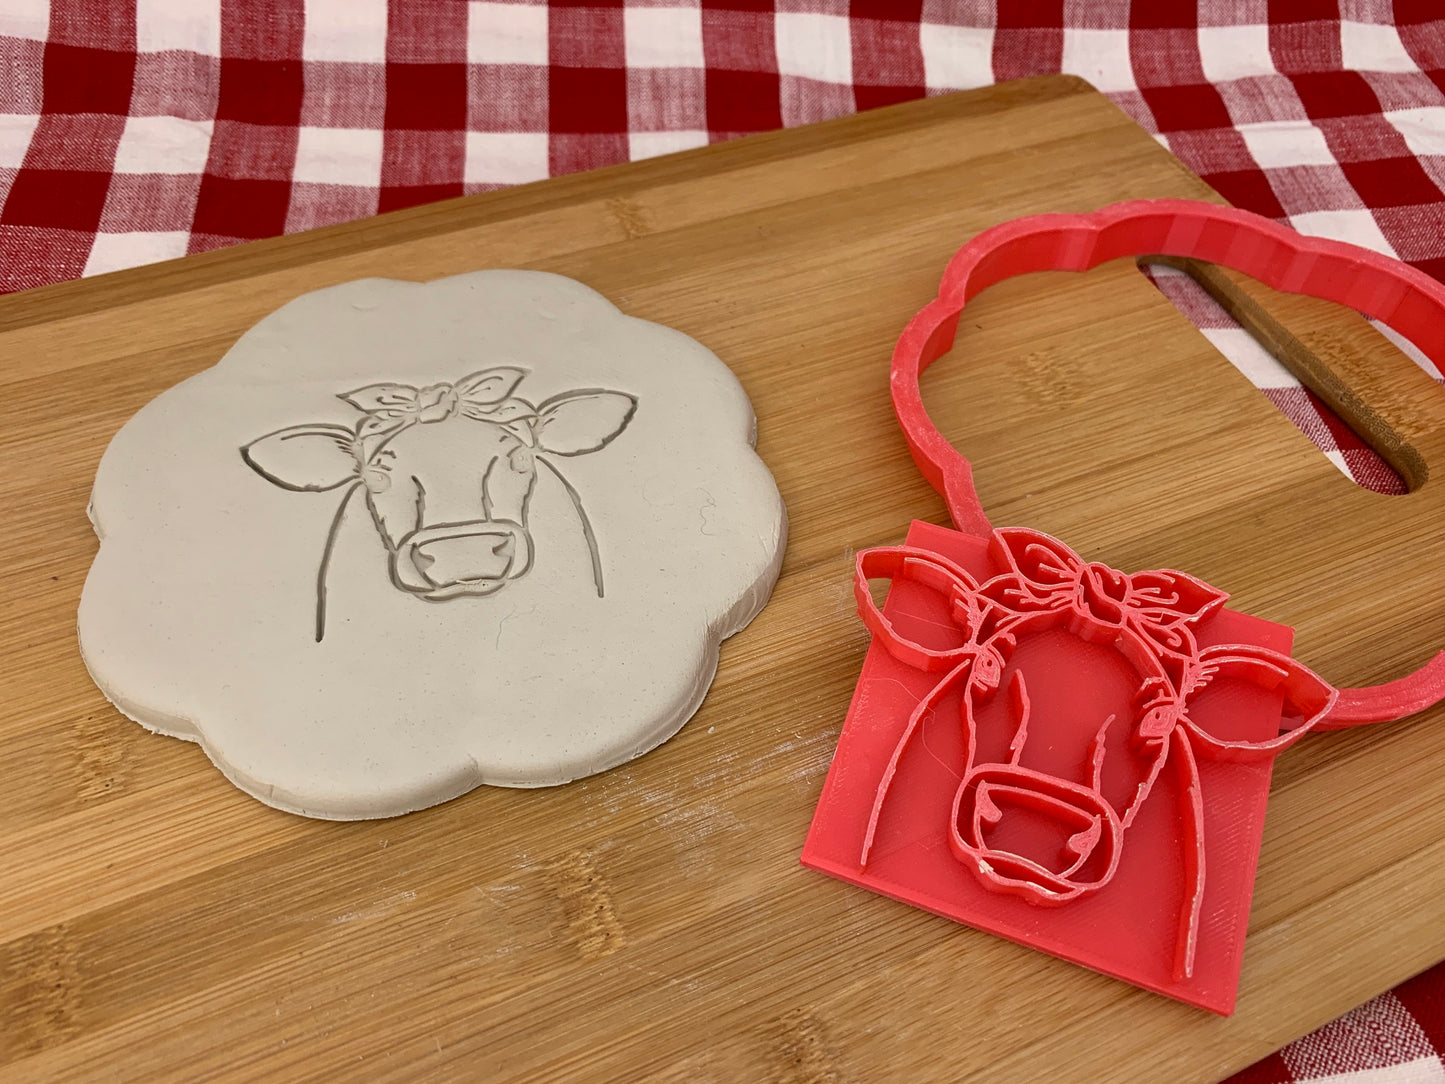 Pottery Stamp, cow face with bandana design - multiple sizes